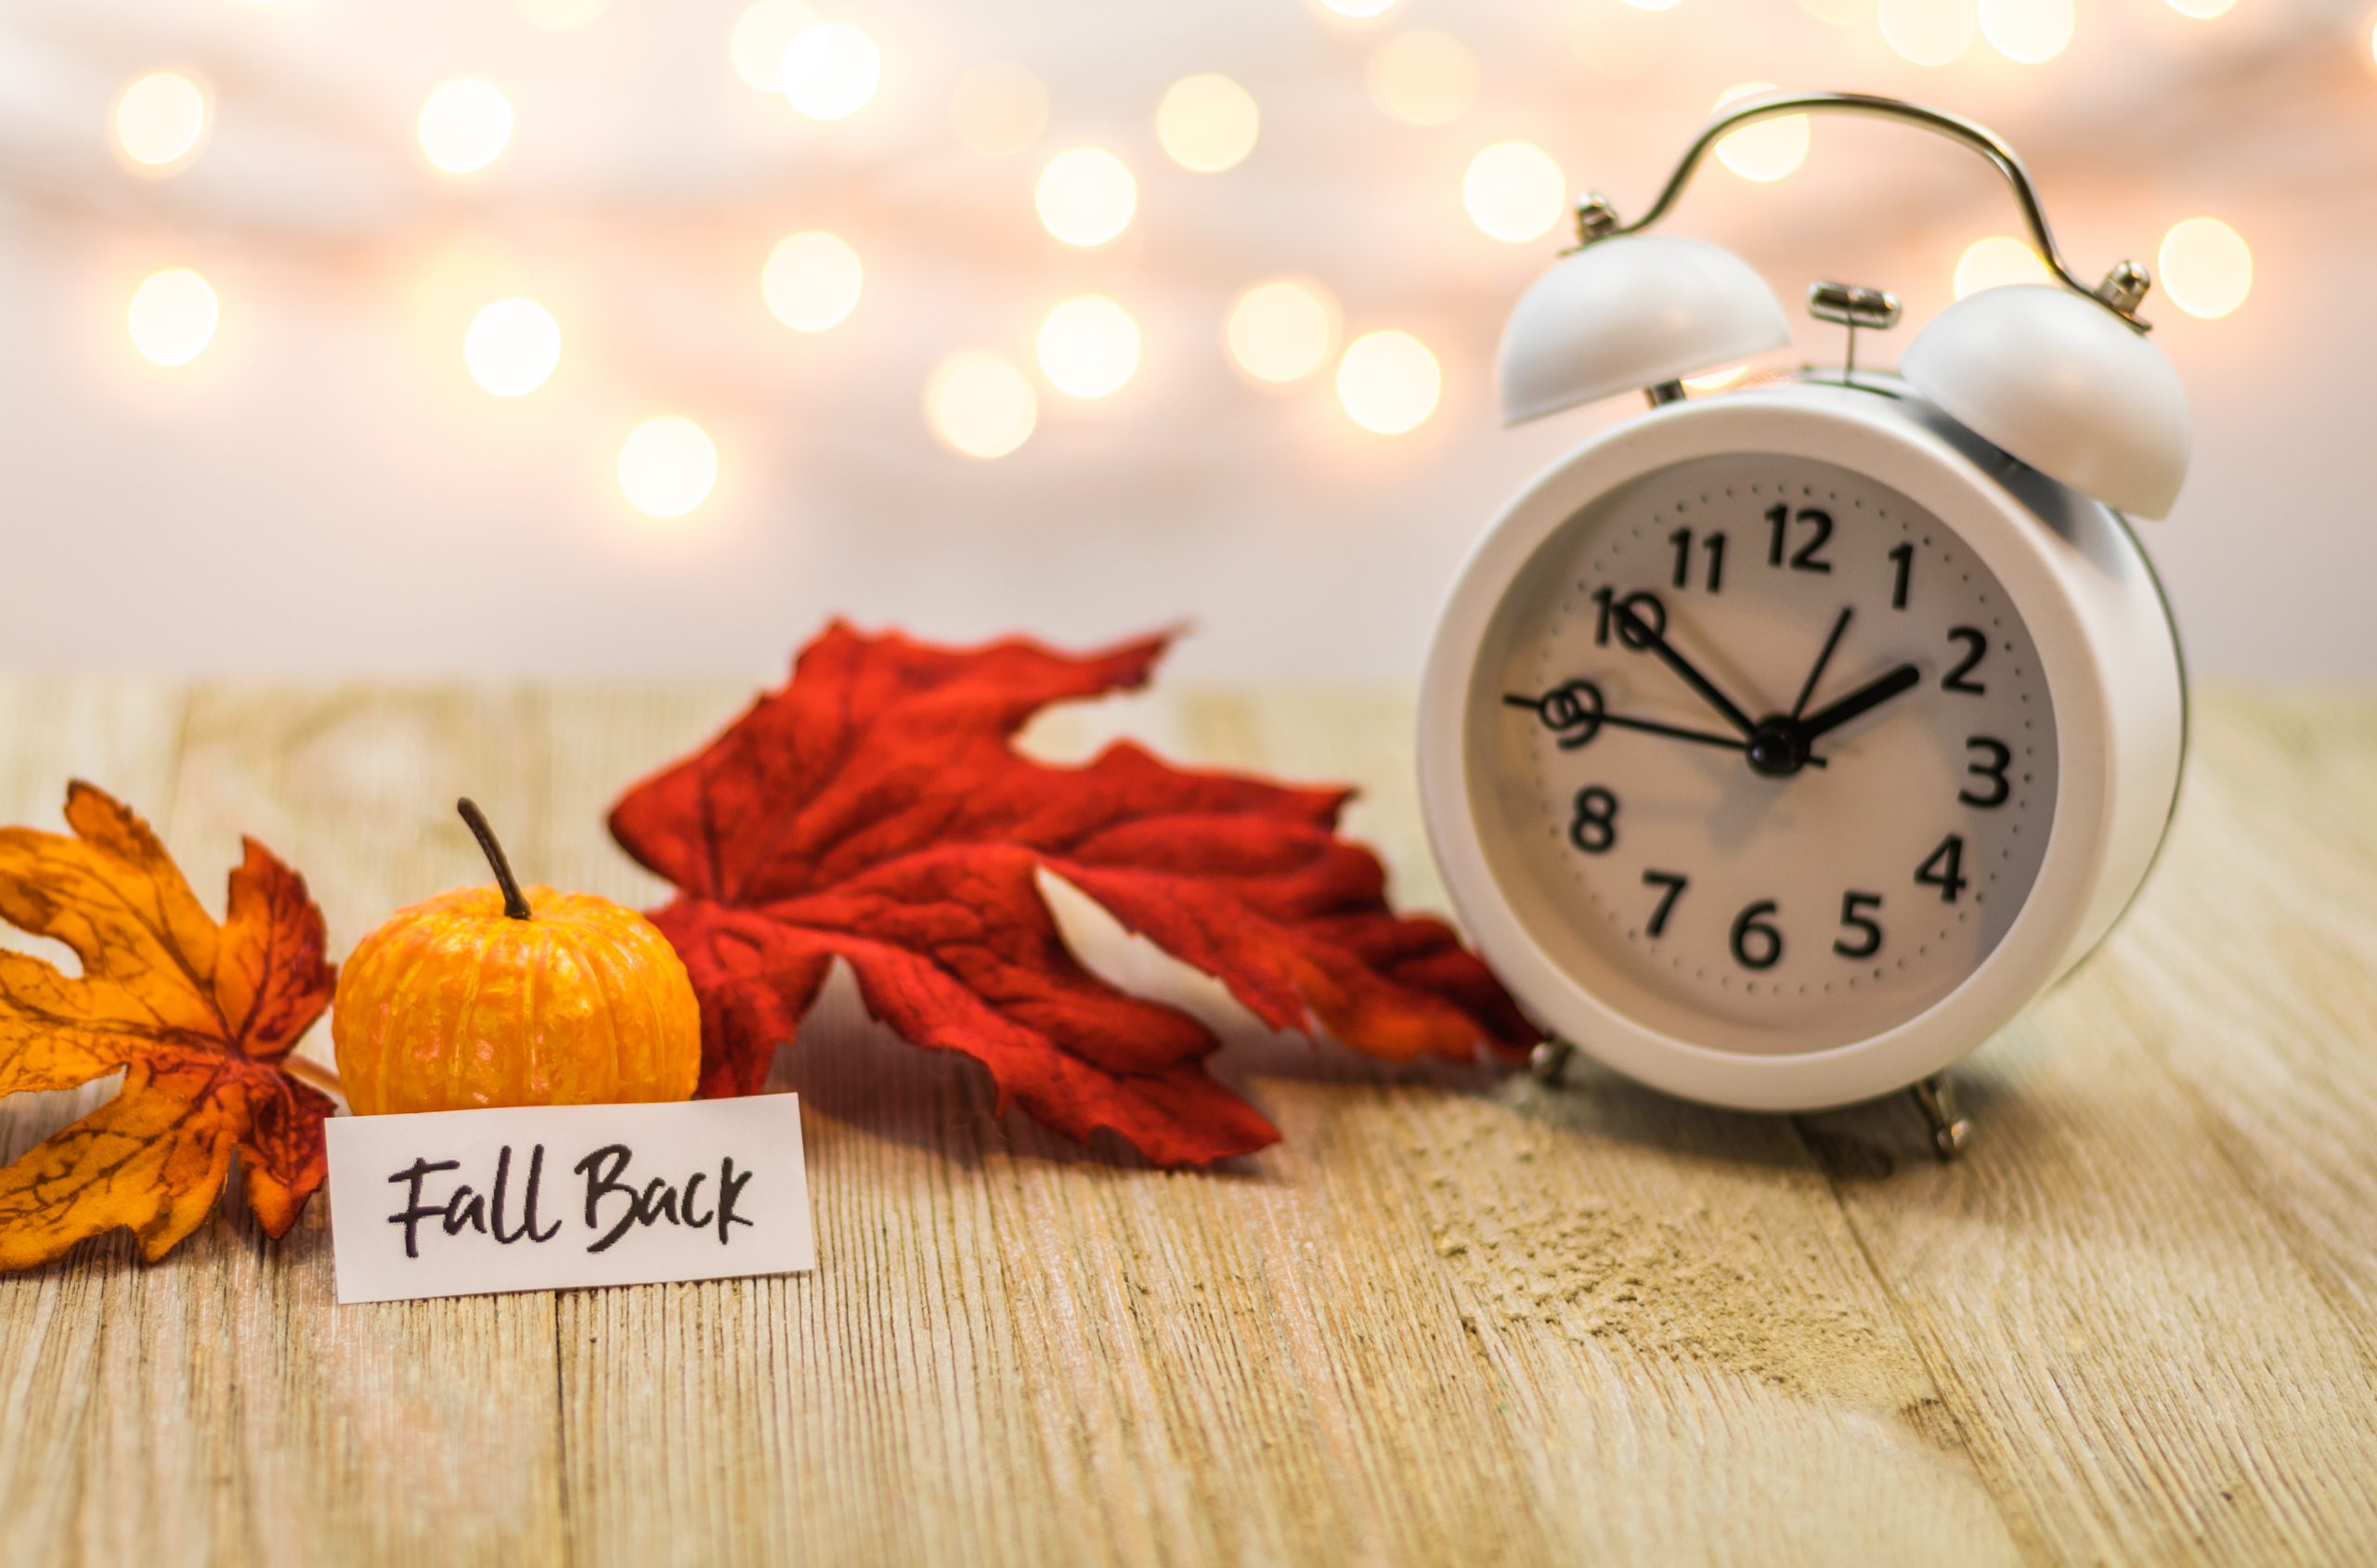 Daylight Saving Time Will Come To An End On Sunday, November 3rd